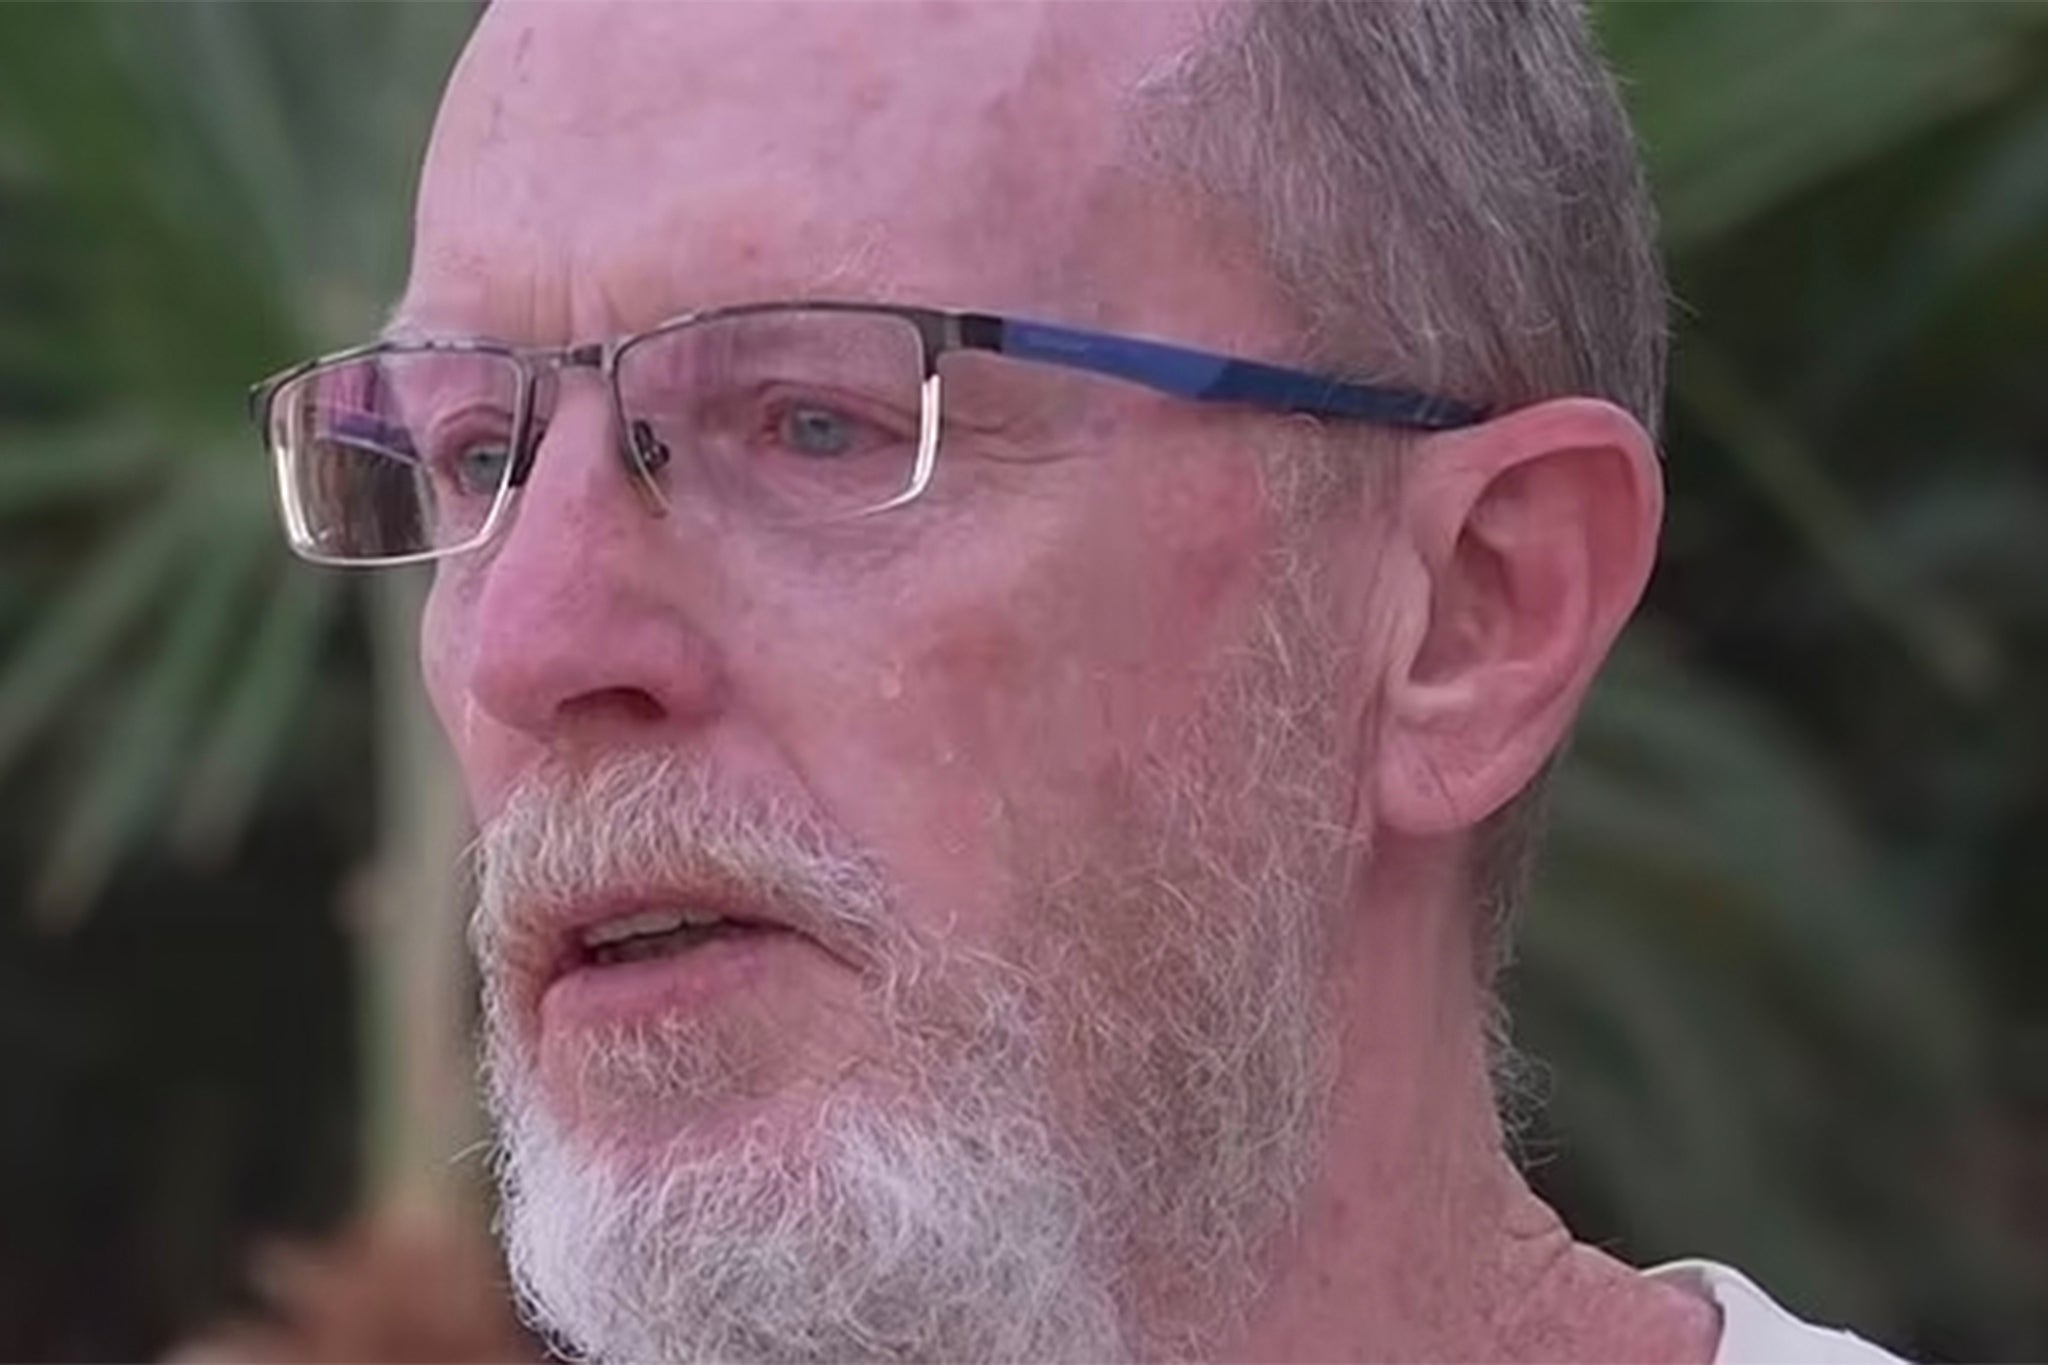 Thomas Hand was in tears as he spoke about the moment he found out his daughter Emily had died